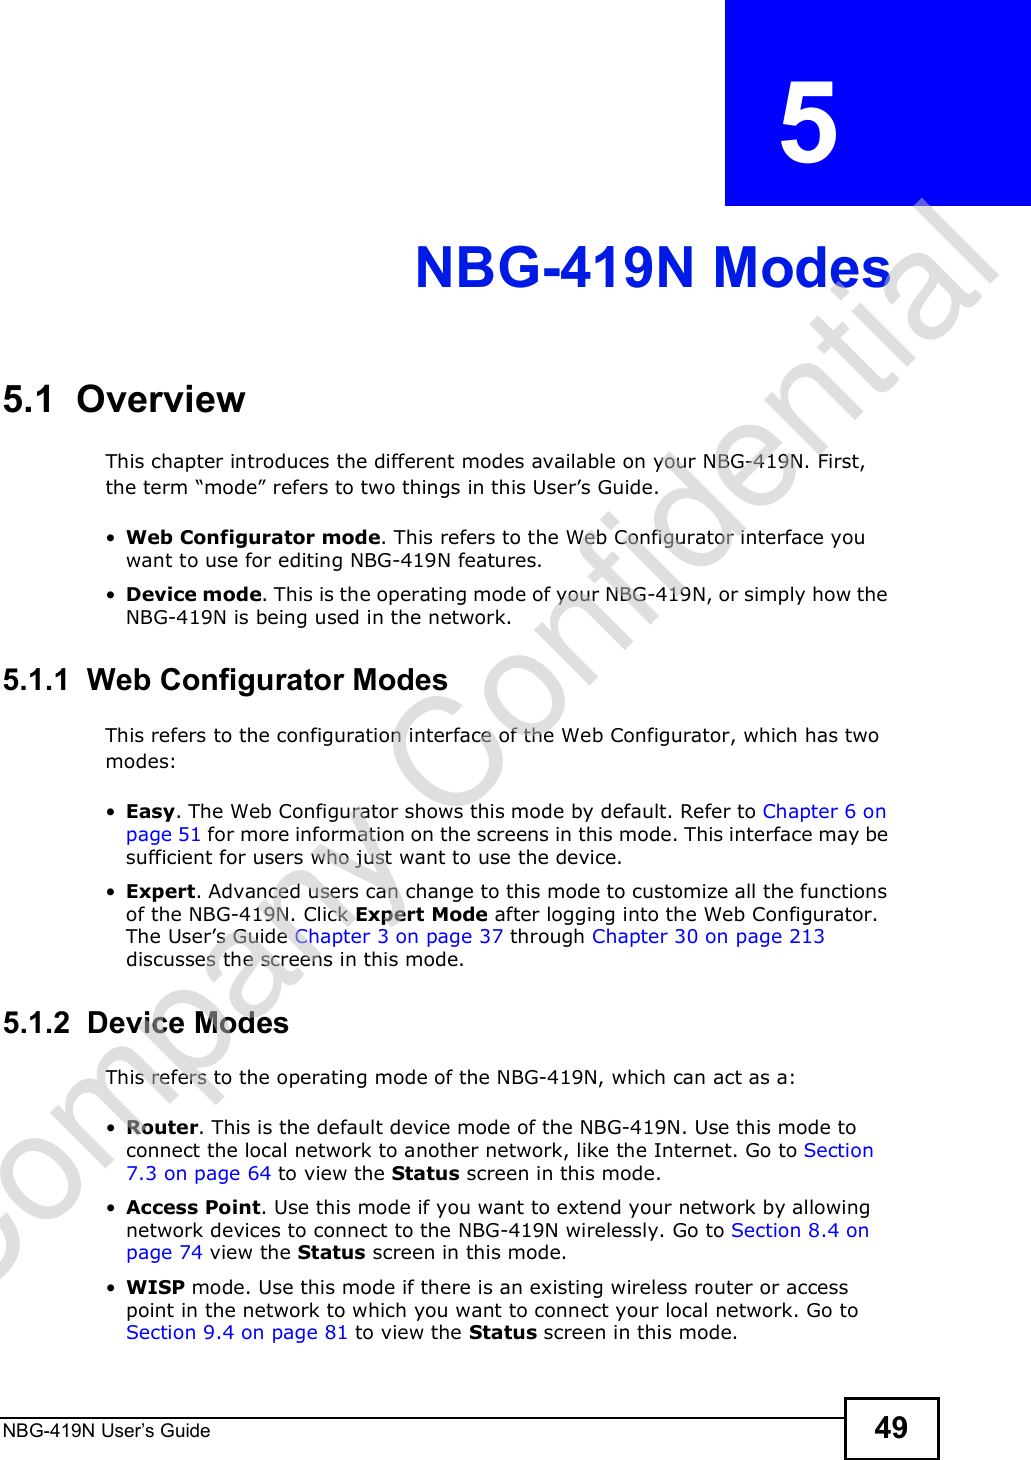 NBG-419N User s Guide 49CHAPTER  5 NBG-419N Modes5.1  OverviewThis chapter introduces the different modes available on your NBG-419N. First, the term &quot;mode# refers to two things in this User!s Guide. Web Configurator mode. This refers to the Web Configurator interface you want to use for editing NBG-419N features.  Device mode. This is the operating mode of your NBG-419N, or simply how the NBG-419N is being used in the network. 5.1.1  Web Configurator ModesThis refers to the configuration interface of the Web Configurator, which has two modes: Easy. The Web Configurator shows this mode by default. Refer to Chapter 6 on page 51 for more information on the screens in this mode. This interface may be sufficient for users who just want to use the device. Expert. Advanced users can change to this mode to customize all the functions of the NBG-419N. Click Expert Mode after logging into the Web Configurator. The User!s Guide Chapter 3 on page 37 through Chapter 30 on page 213 discusses the screens in this mode.5.1.2  Device ModesThis refers to the operating mode of the NBG-419N, which can act as a: Router. This is the default device mode of the NBG-419N. Use this mode to connect the local network to another network, like the Internet. Go to Section 7.3 on page 64 to view the Status screen in this mode. Access Point. Use this mode if you want to extend your network by allowing network devices to connect to the NBG-419N wirelessly. Go to Section 8.4 on page 74 view the Status screen in this mode. WISP mode. Use this mode if there is an existing wireless router or access point in the network to which you want to connect your local network. Go to Section 9.4 on page 81 to view the Status screen in this mode.Company Confidential